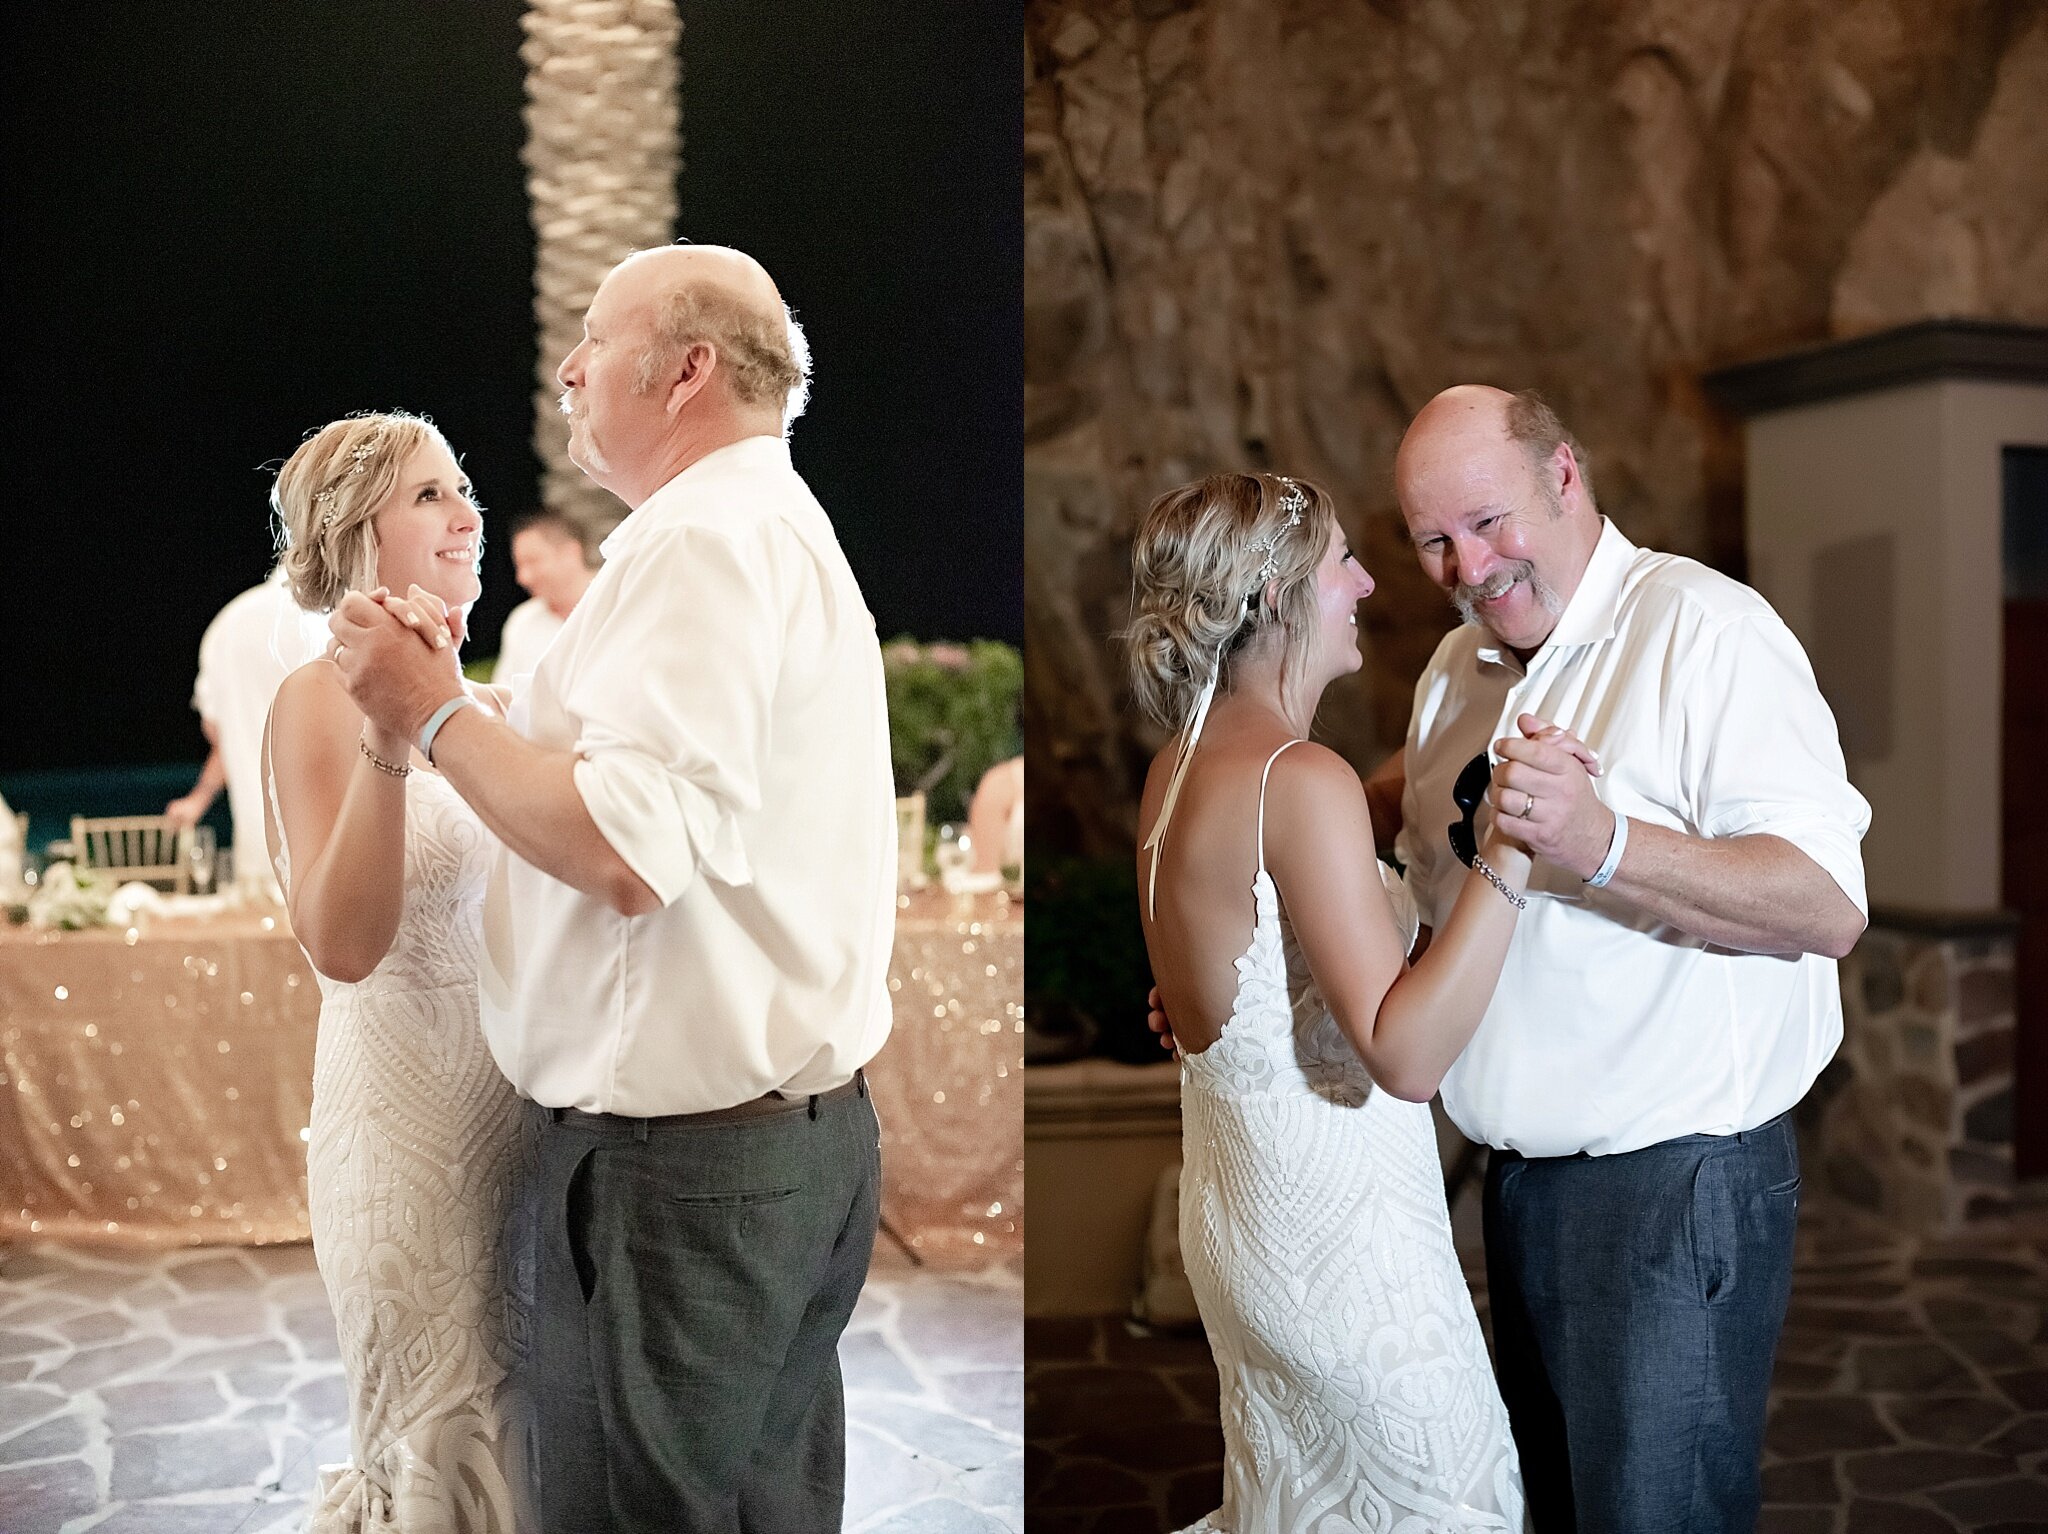 father daughter dance at rooftop poolside wedding reception destination pueblo bonito sunset beach mexico